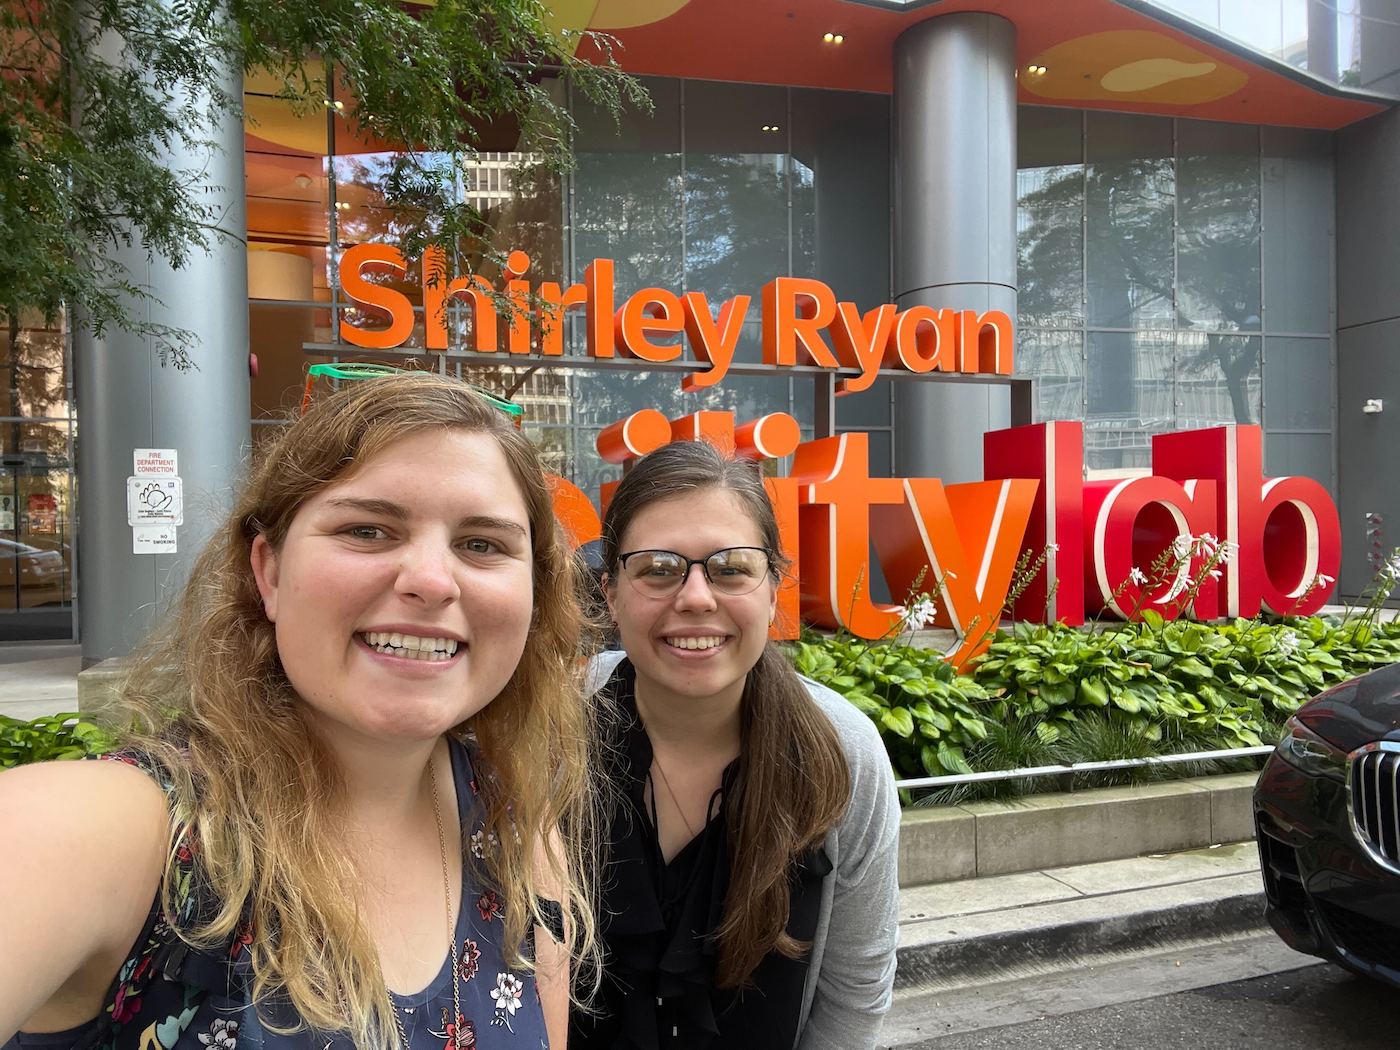 Two people smiling and taking a selfie while standing in front of The Shirley Ryan Ability Lab sign. Mia has blonde hair. Charlotte has brown hair and is wearing glasses.